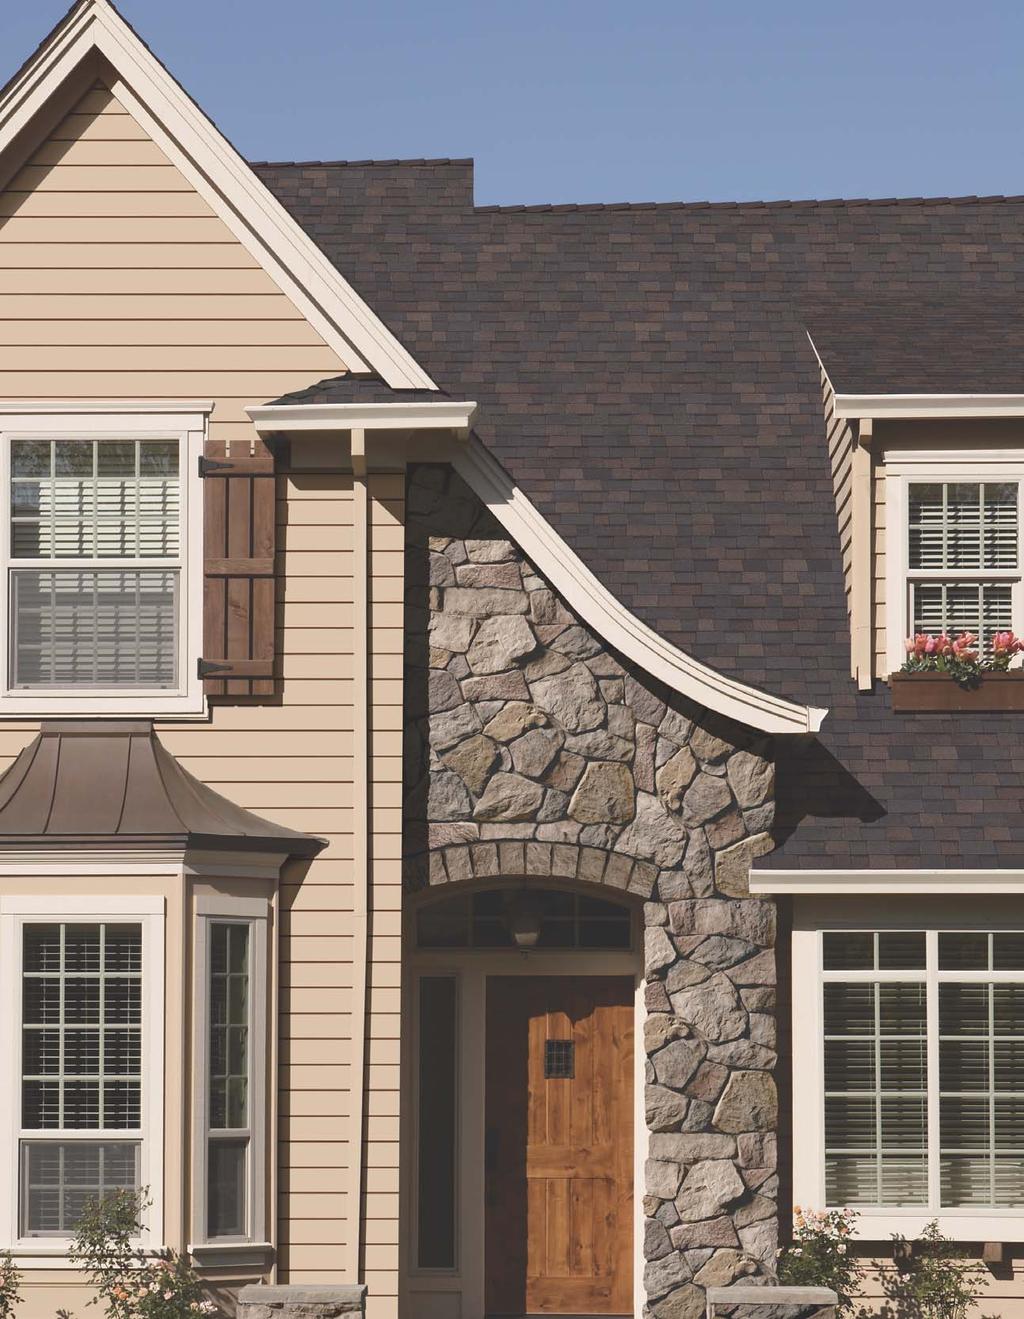 Roofing Choose a shingle with granules that play up the accent colors on your exterior. Also consider how the shingles shadowing can add dimension to your roof.